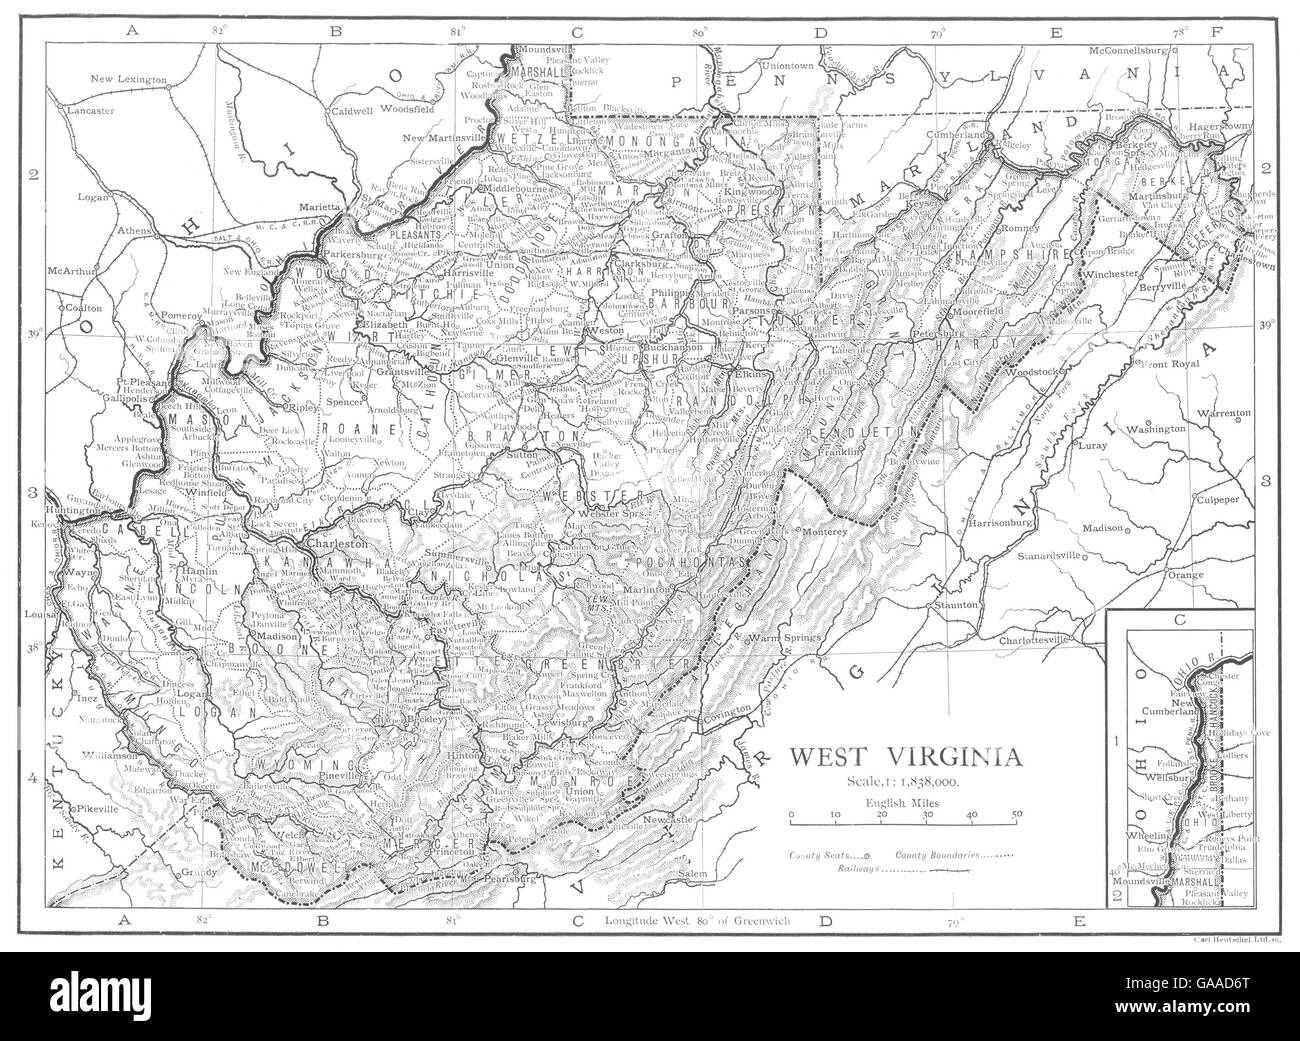 WEST VIRGINIA: West Virginia state map showing counties, 1910 Stock Photo